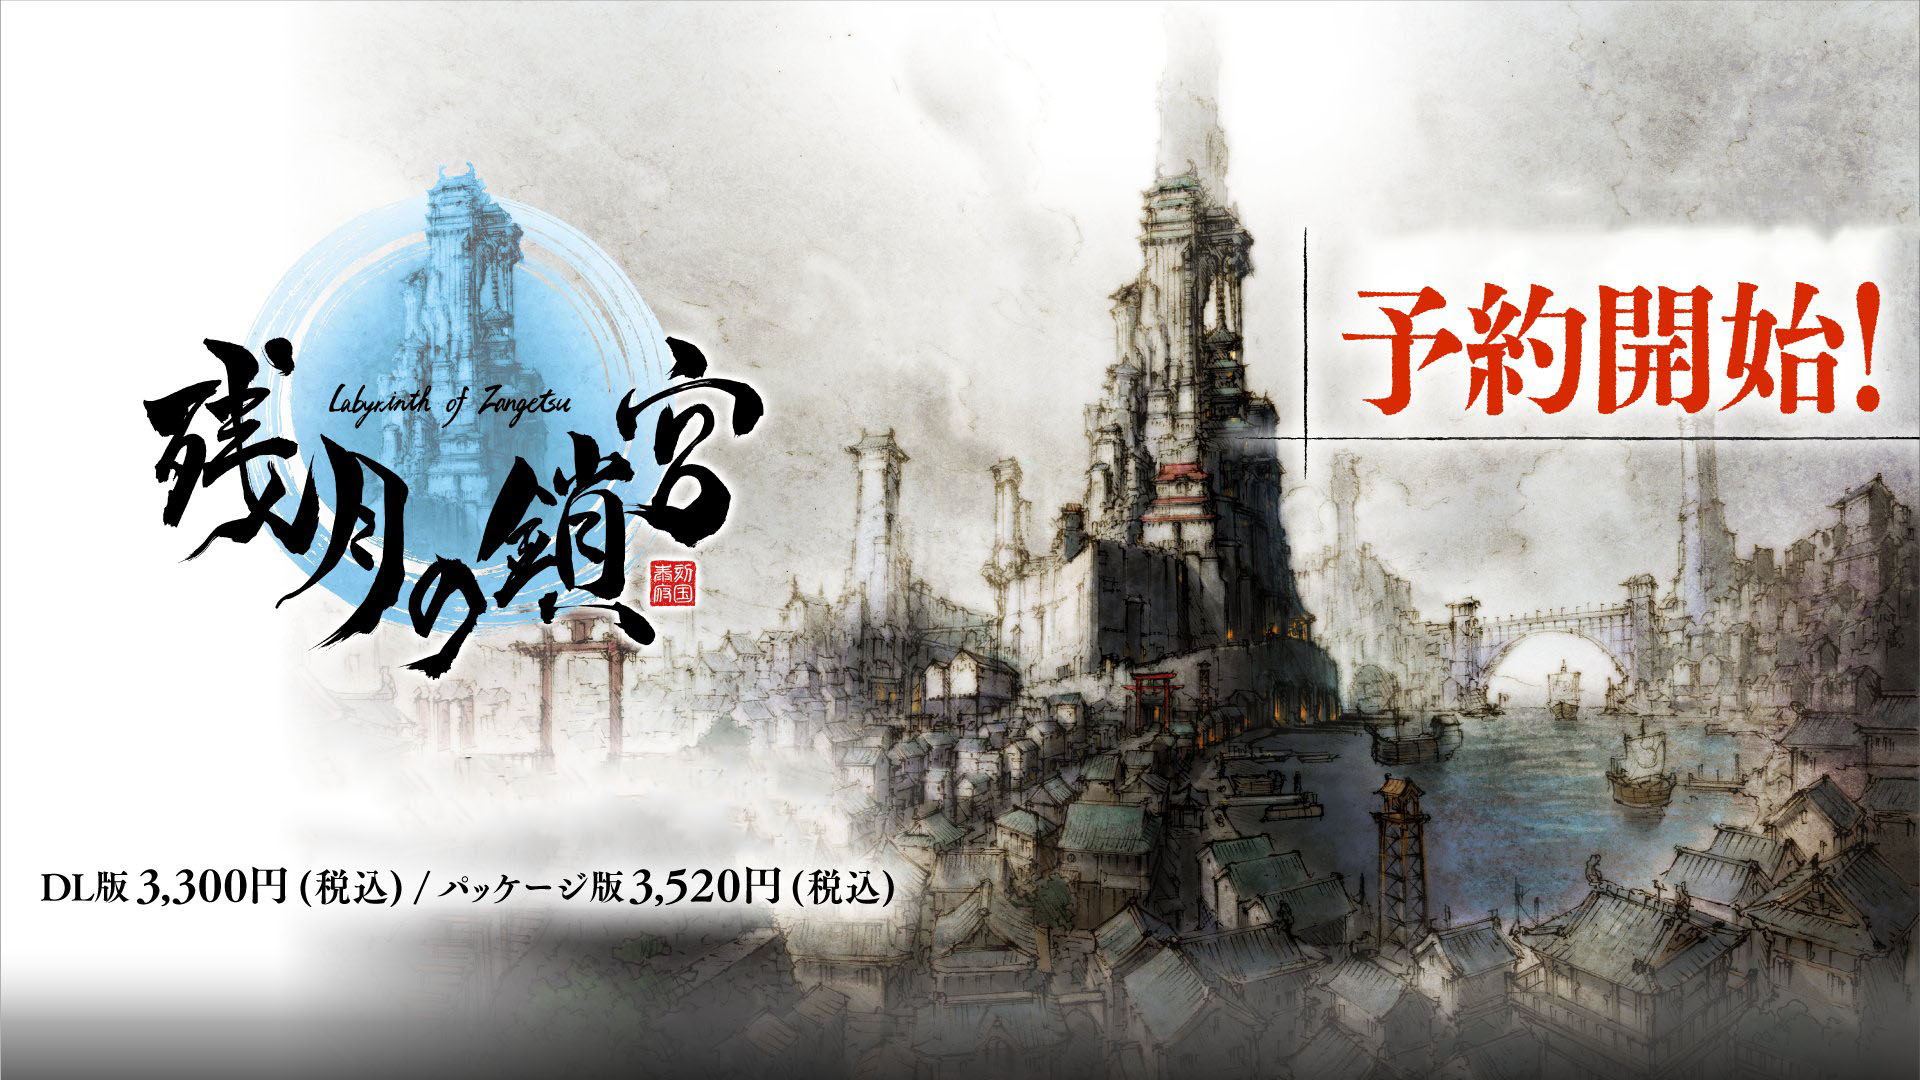 Brush stroke dungeon RPG Labyrinth of Zangetsu launches September 2022 in Japan